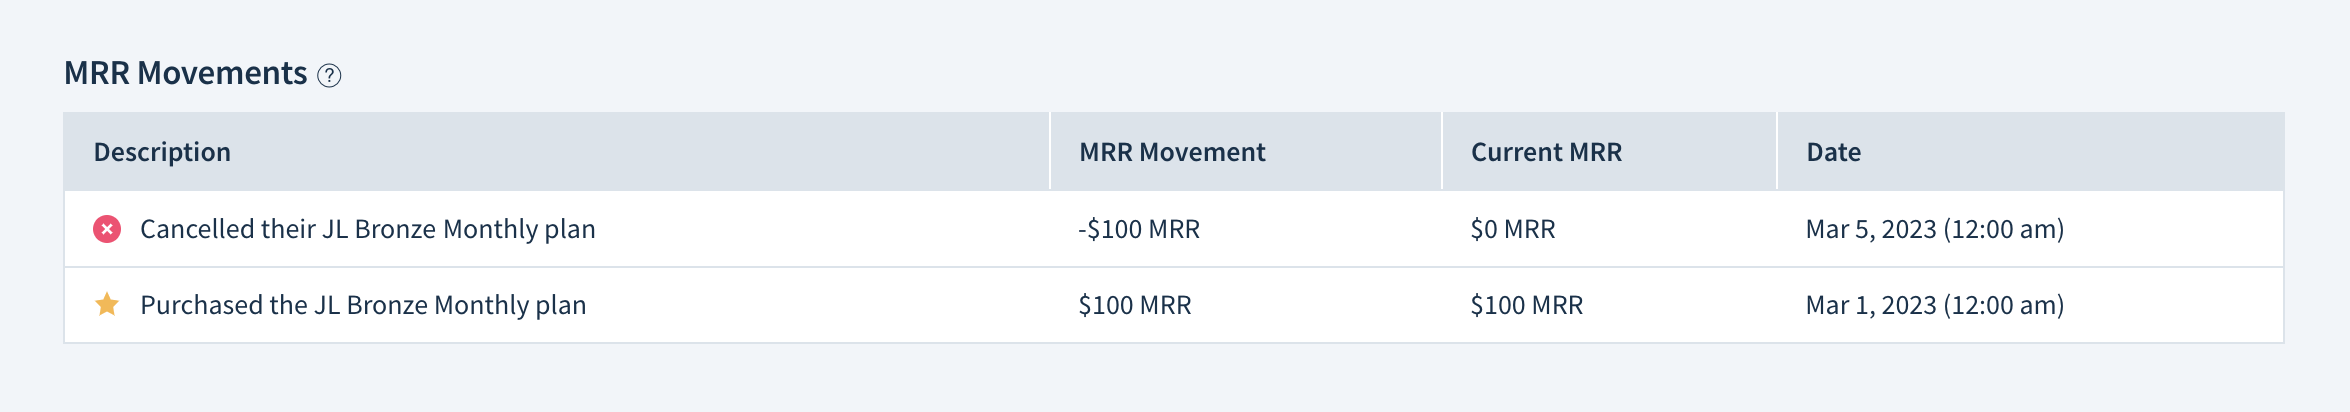 Screenshot of the MRR Movements table. It shows a new business movement of 100 dollars is described as “Purchased the JL Bronze Monthly plan” on March 1st, 2023. Current MRR after this movement is 100 dollars. On March 5th, there’s a churn of minus 100 dollars described as “Cancelled their JL Bronze Monthly plan”. Current MRR after this movement is zero.